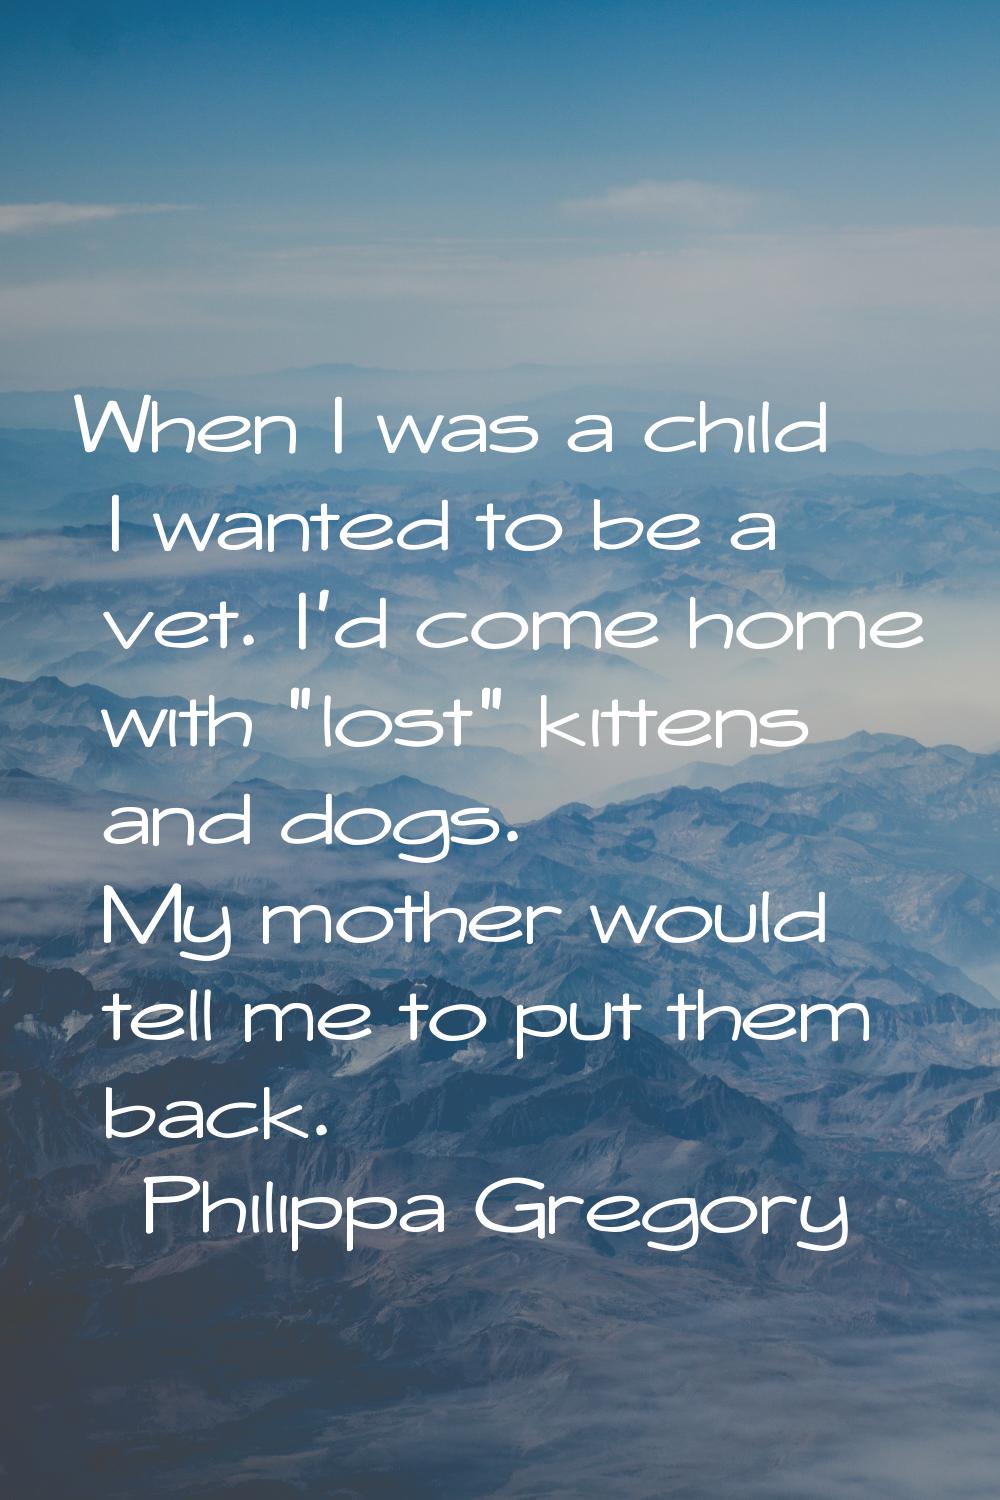 When I was a child I wanted to be a vet. I'd come home with "lost" kittens and dogs. My mother woul